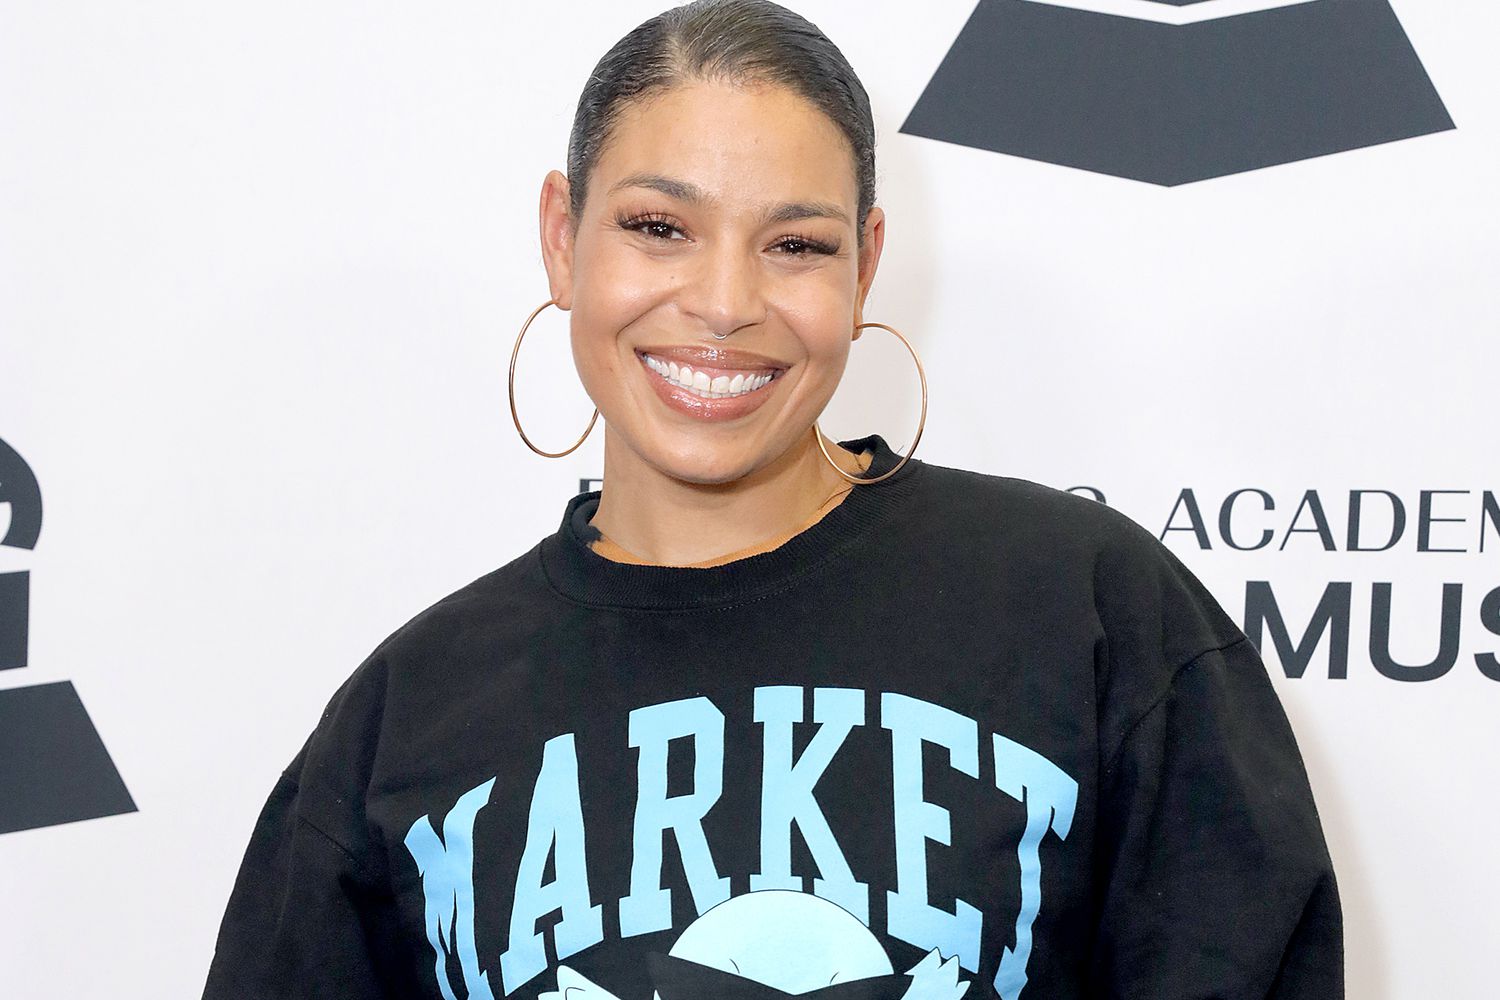 LOS ANGELES, CALIFORNIA - AUGUST 04: Jordin Sparks attends GRAMMY Camp Lunch and Learn with LA Chapter Board at Ronald Tutor Campus Center on August 04, 2022 in Los Angeles, California. (Photo by Rebecca Sapp/Getty Images for The Recording Academy)